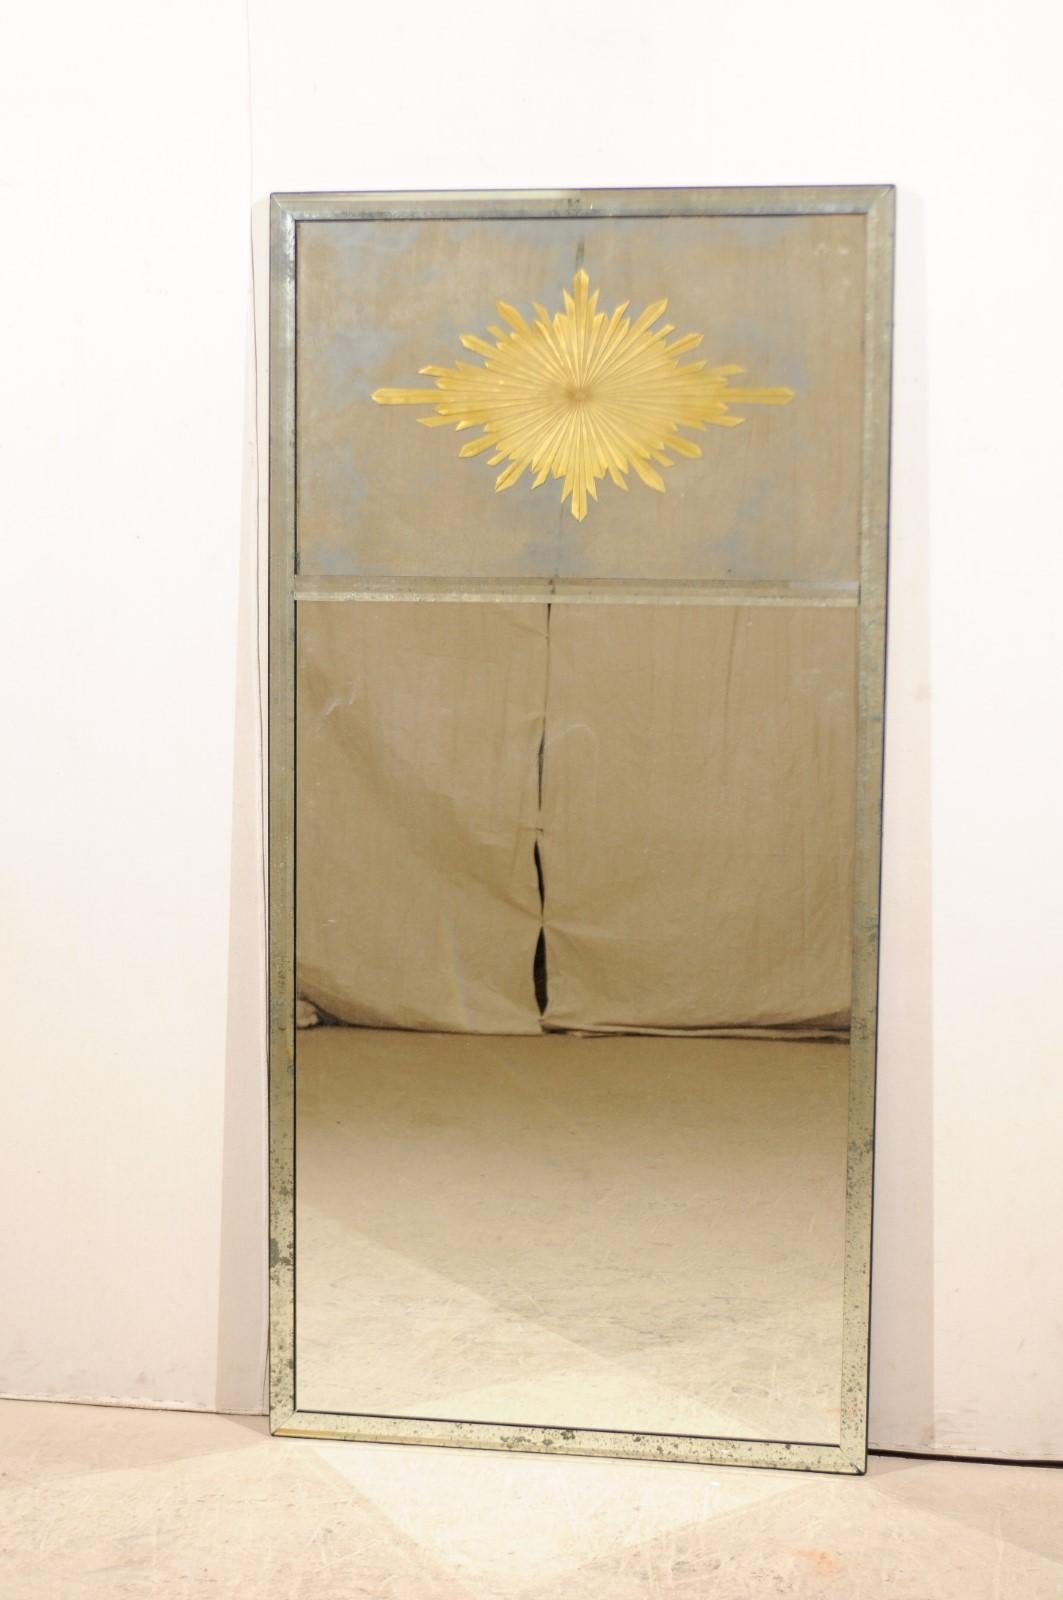 A tall American mirror with verre églomisé sunburst at upper center within a mirrored frame. This rectangular-shaped mirror stands at over 6.25 feet tall, features a cleanly designed antiqued-mirror surround, two-paneled glass center, with the gold